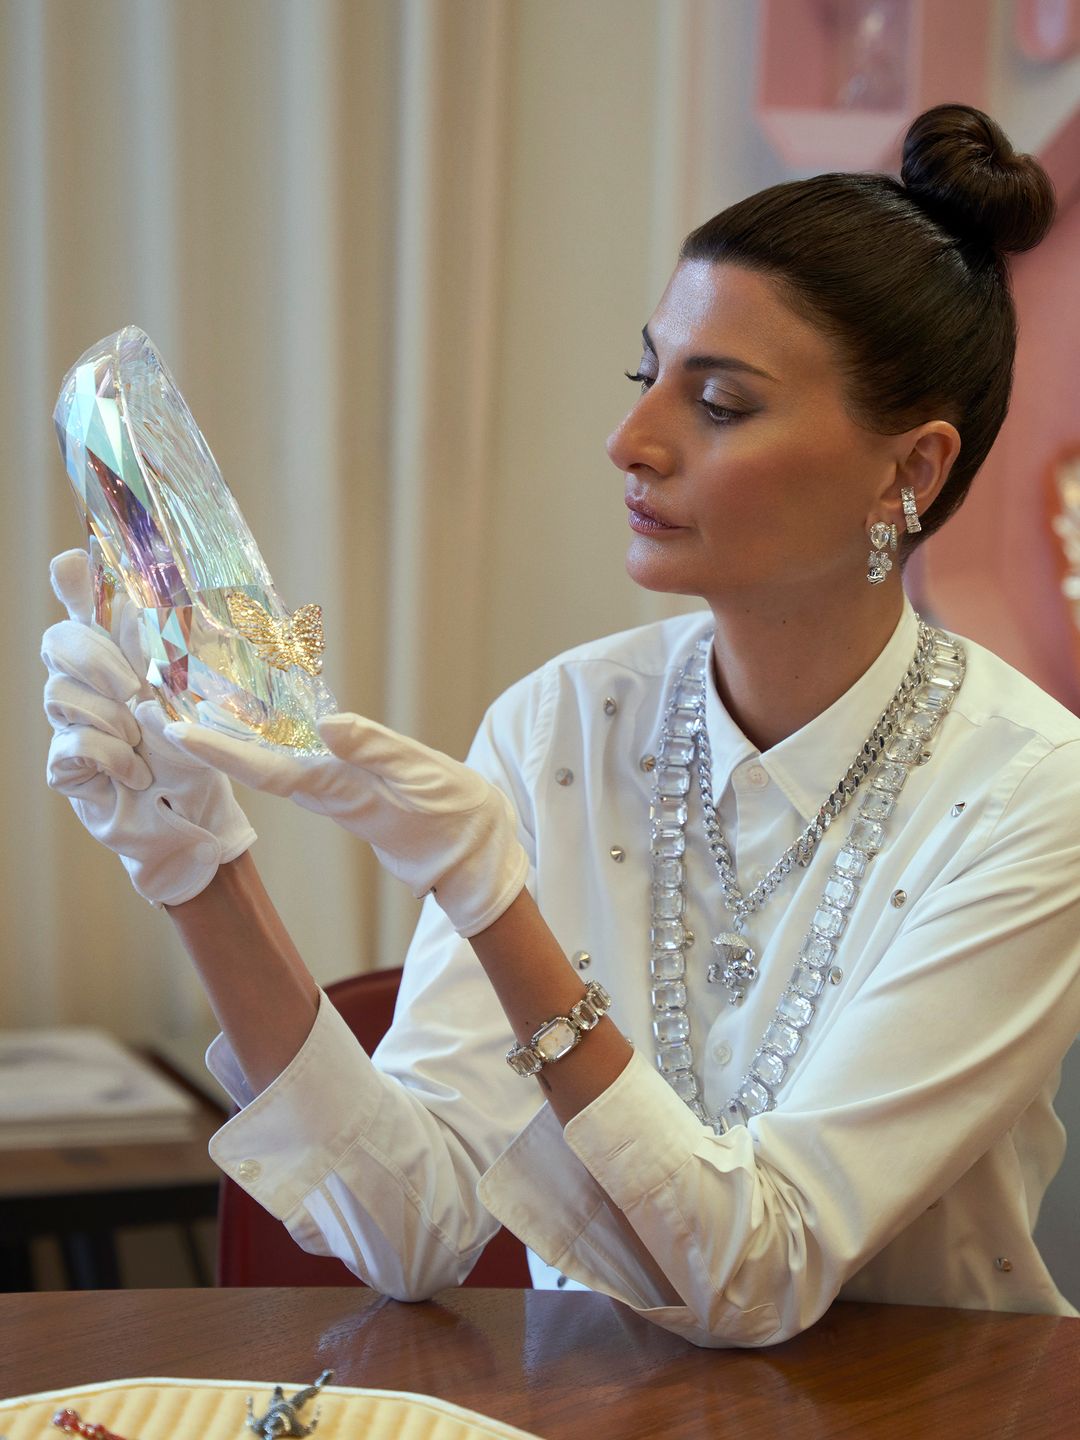 Giovanna Engelbert with the iconic glass slipper